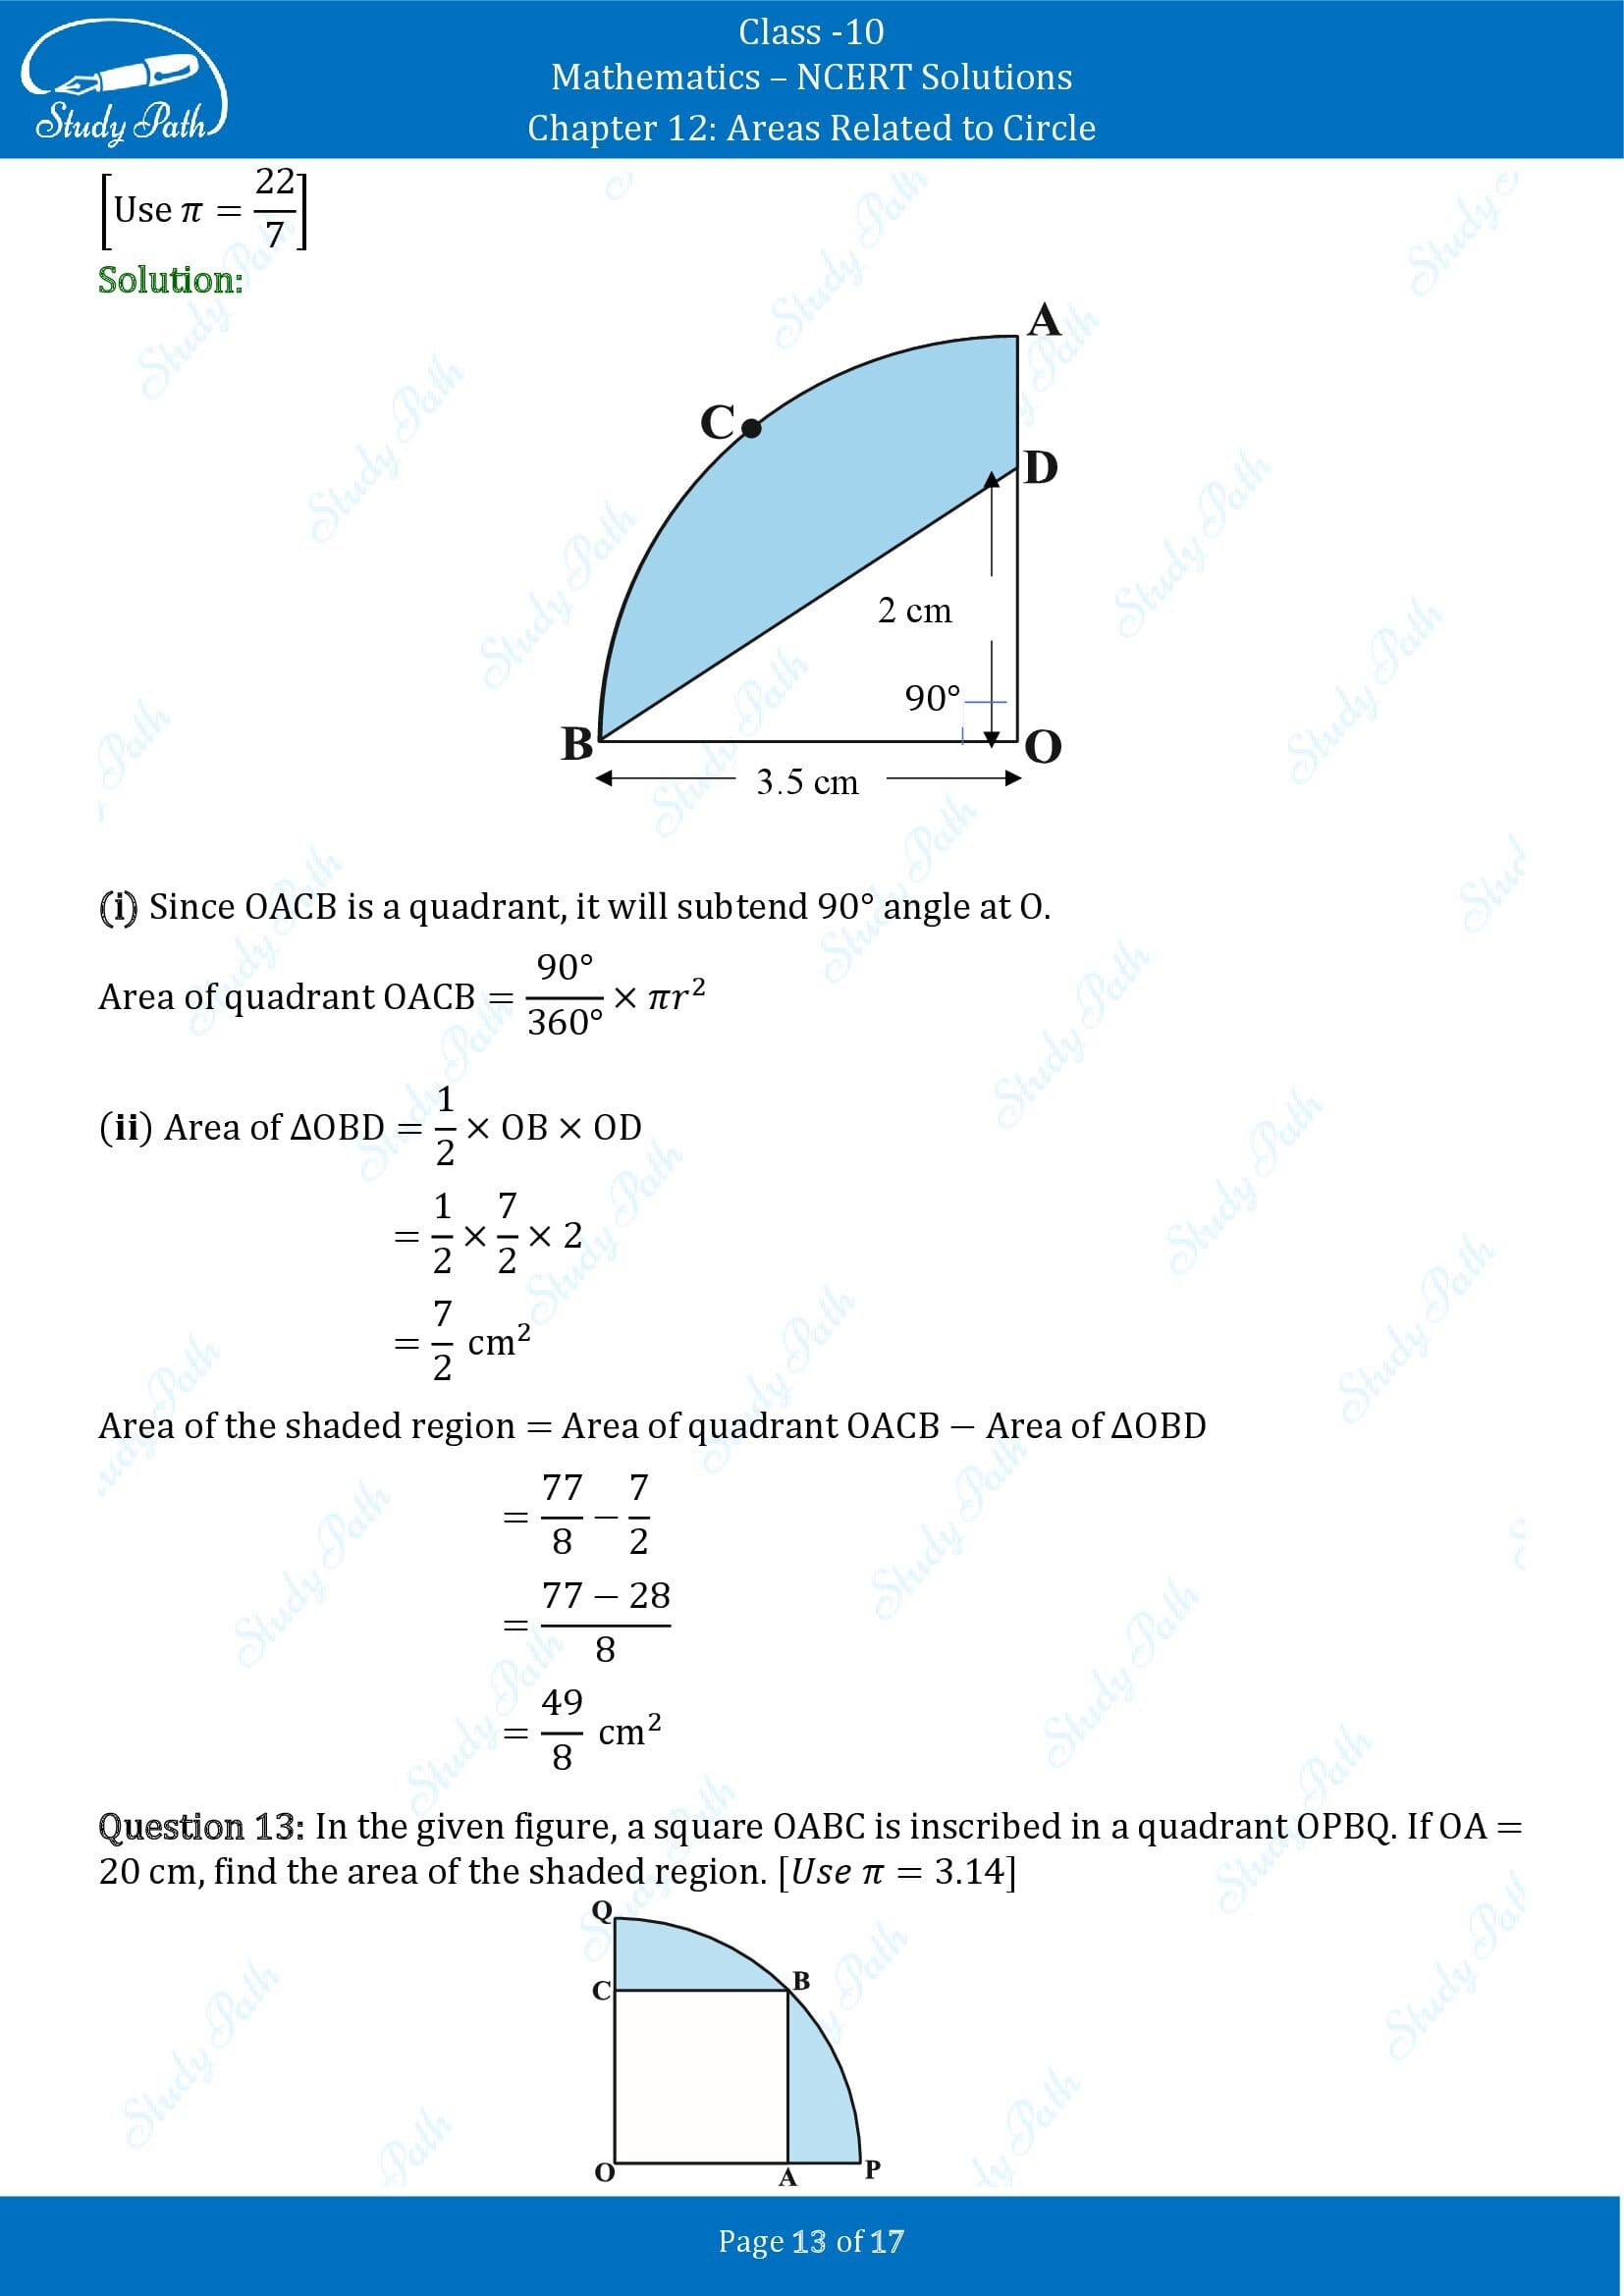 NCERT Solutions for Class 10 Maths Chapter 12 Areas Related to Circles Exercise 12.3 00013